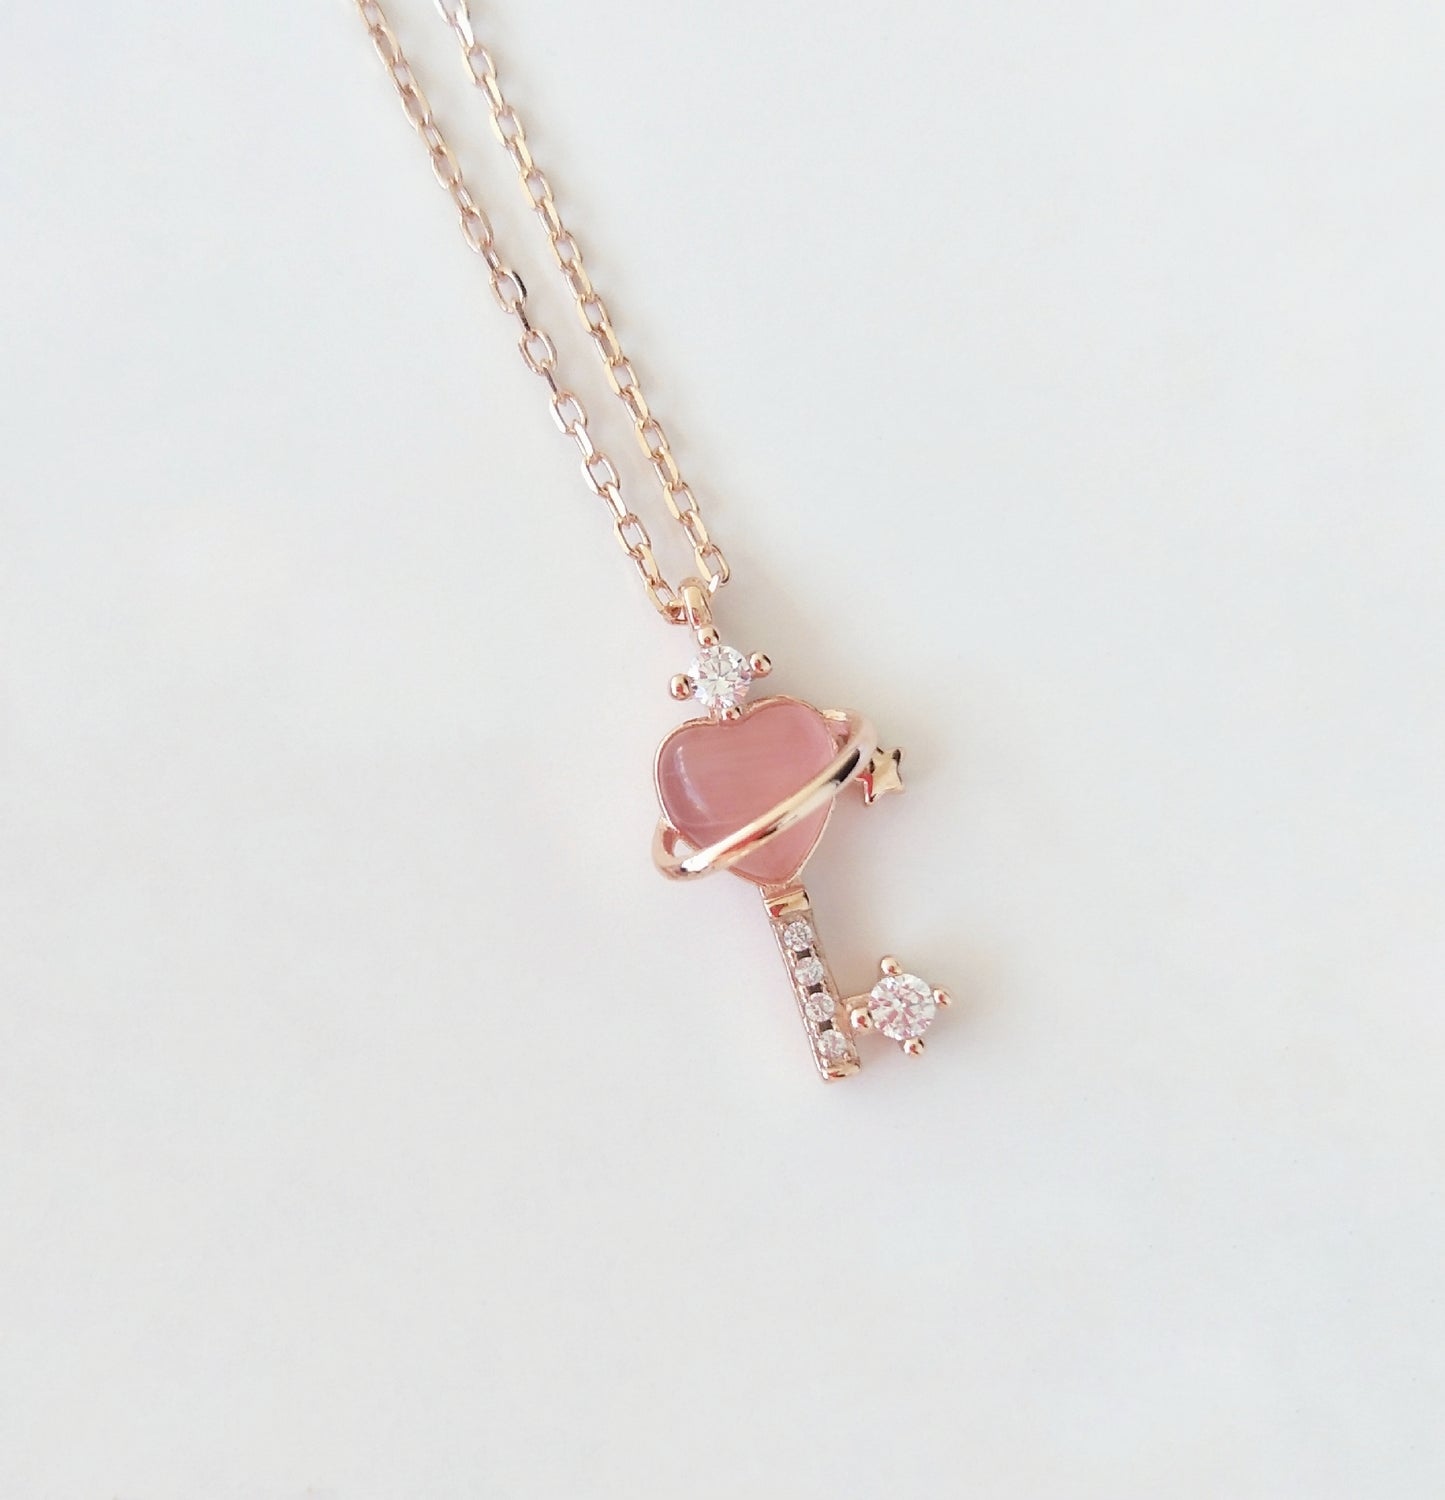 Key To Heart Necklace (Pink Cat-Eye Stone)